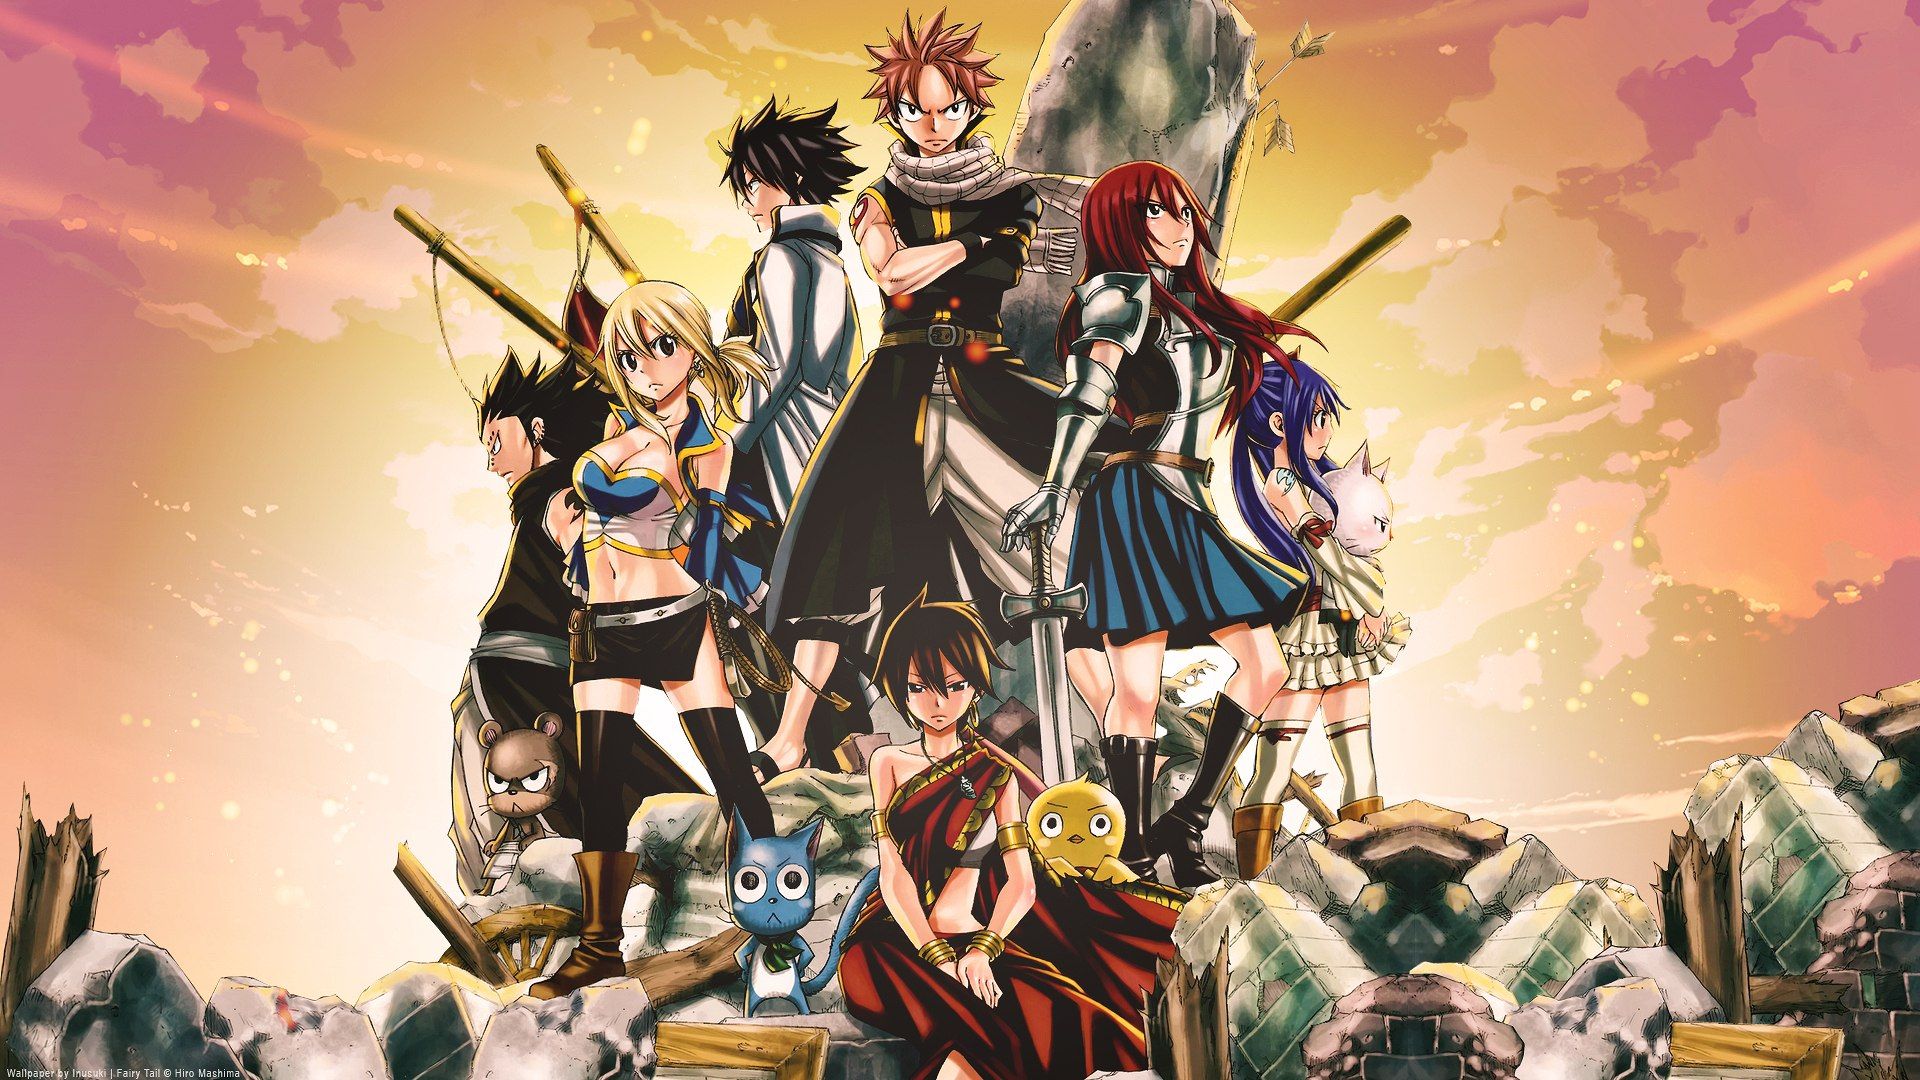 ‘Fairy Tail’ Sequel Makes Its Highly Anticipated Debut